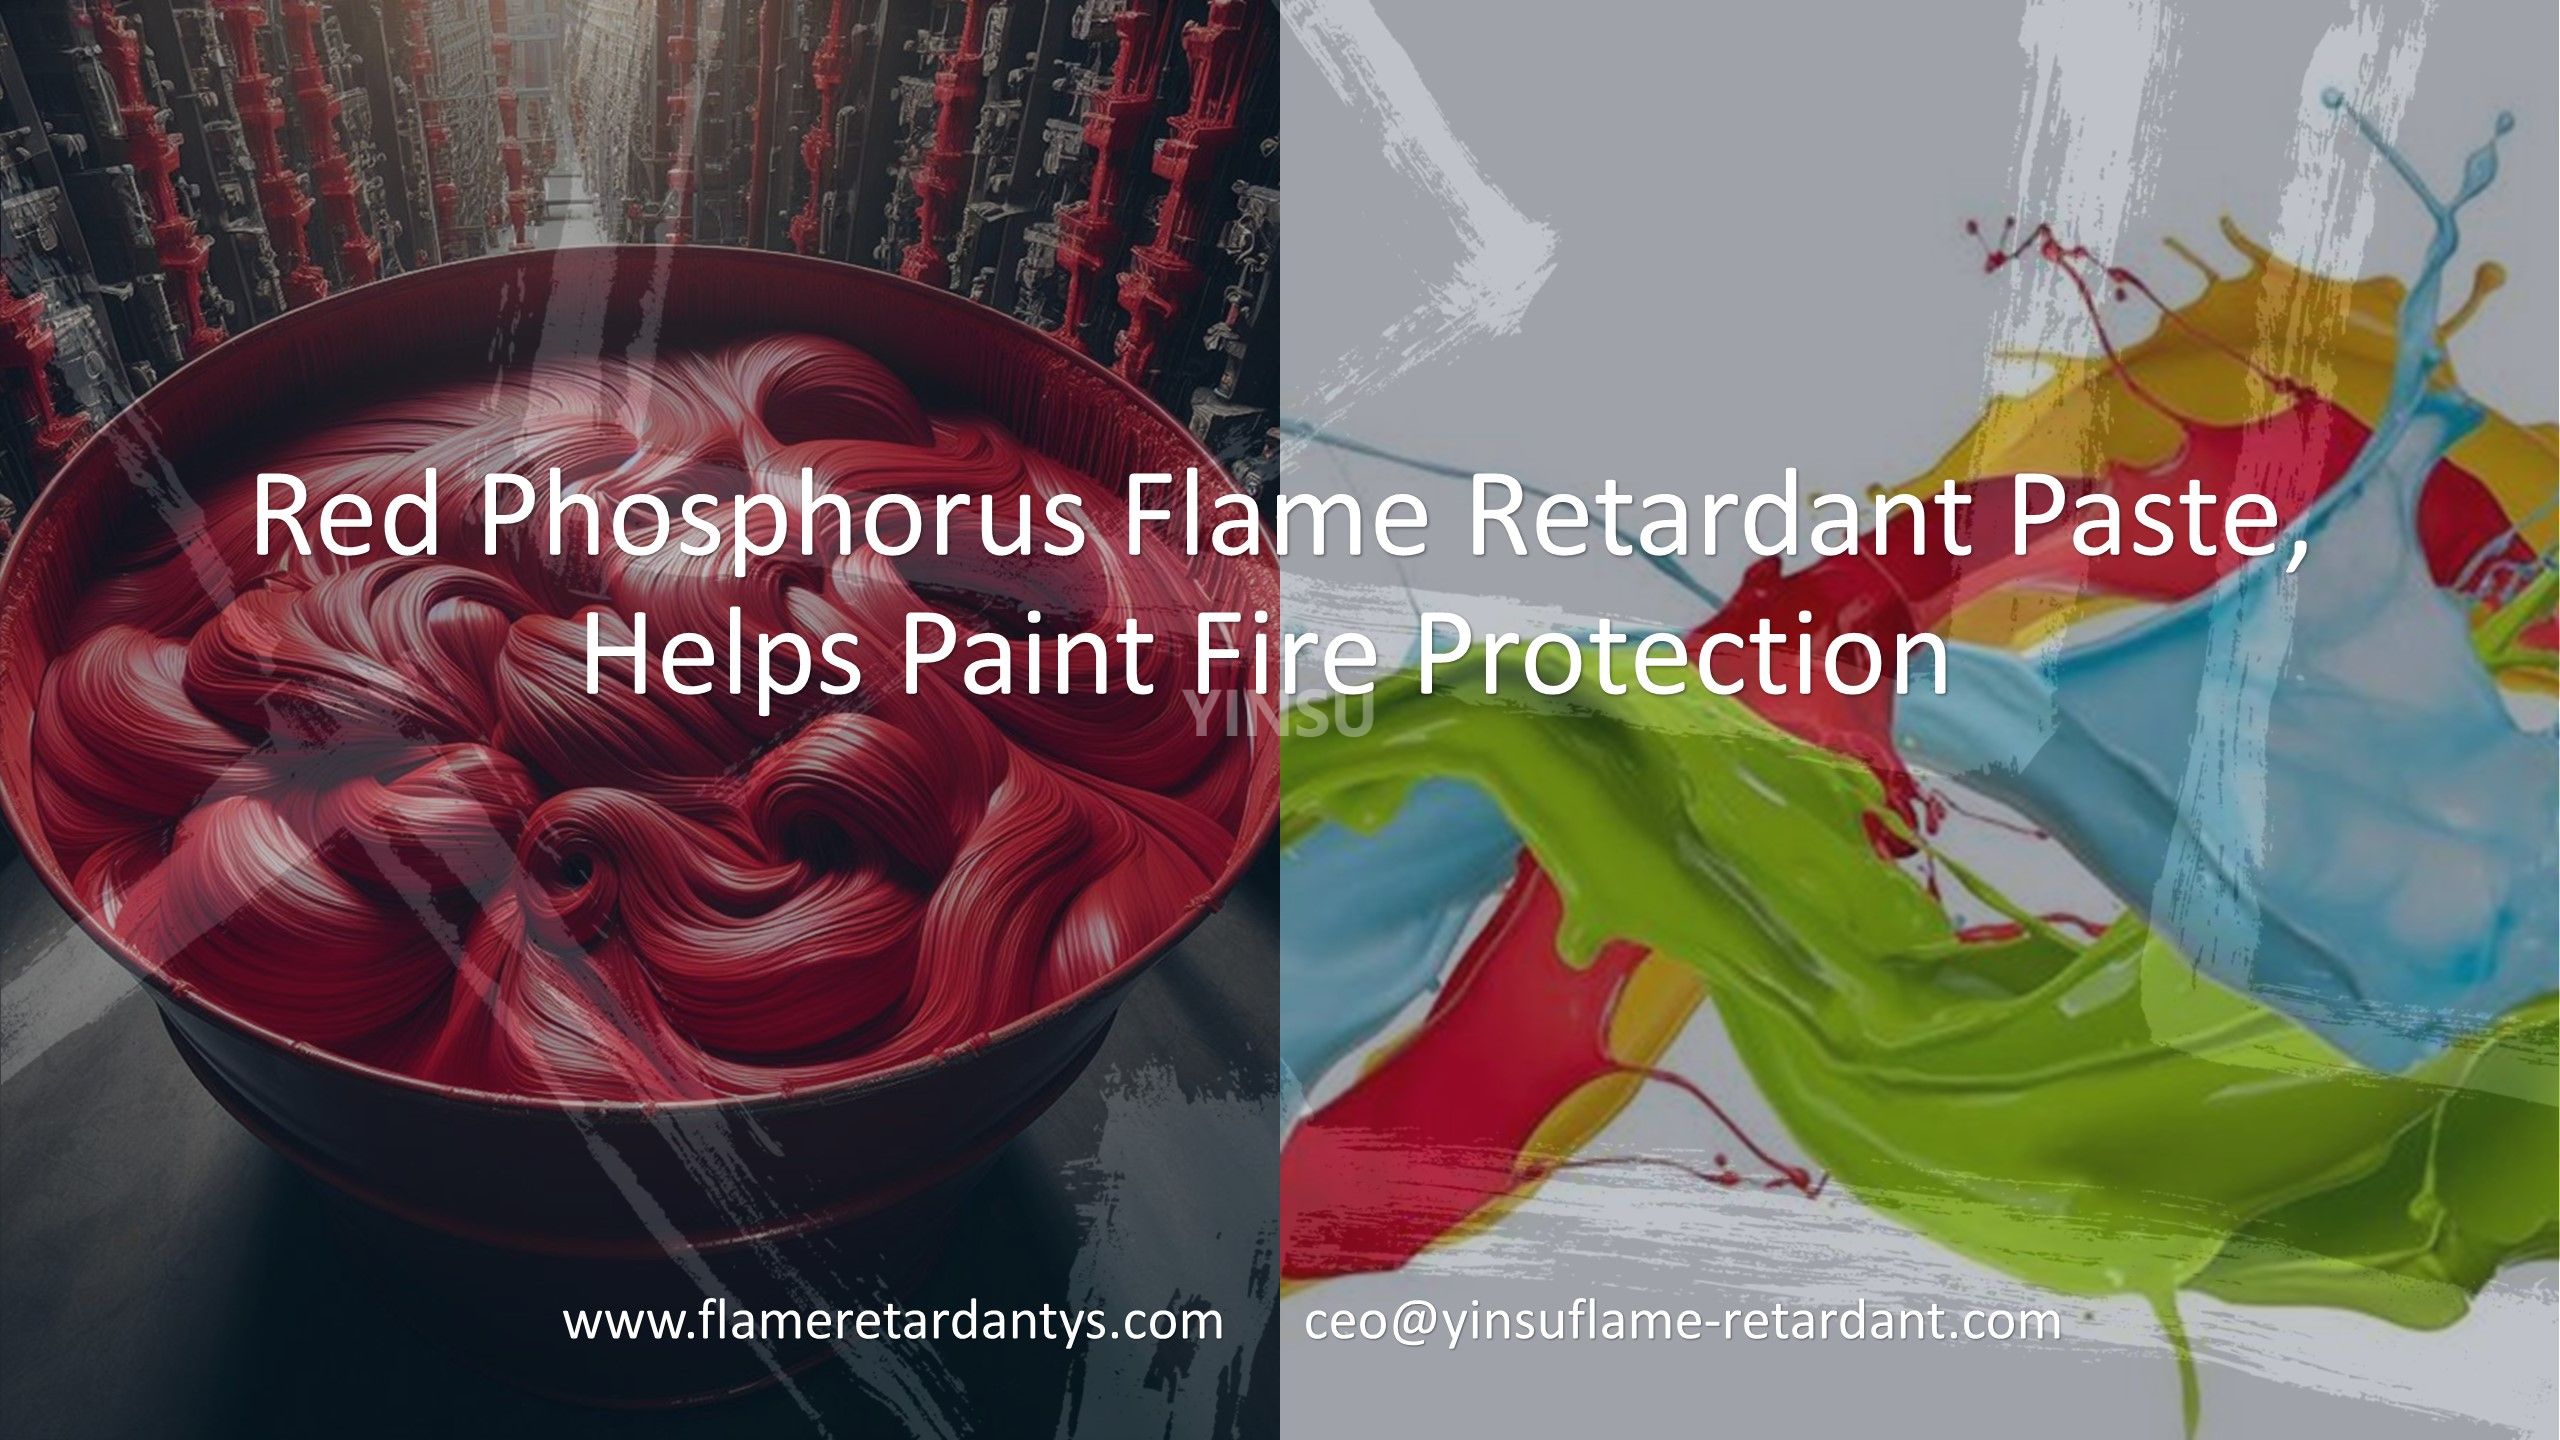 Red Phosphorus Flame Retardant Paste, Helps Paint Fire Protection